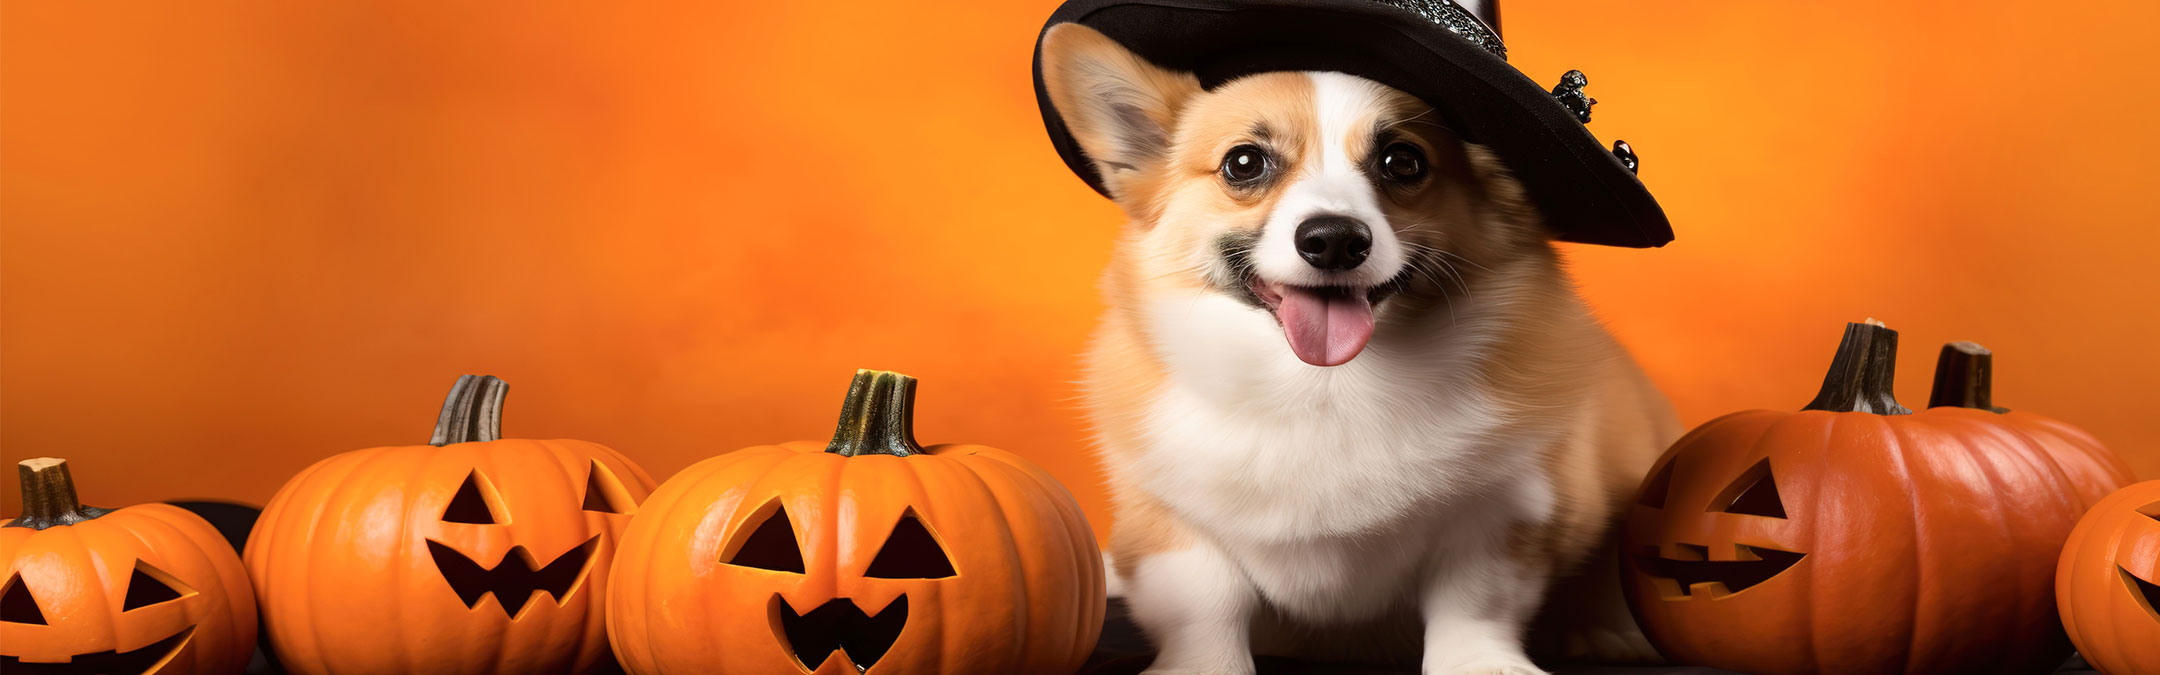 All Fun, No Fright: Halloween Pet Safety